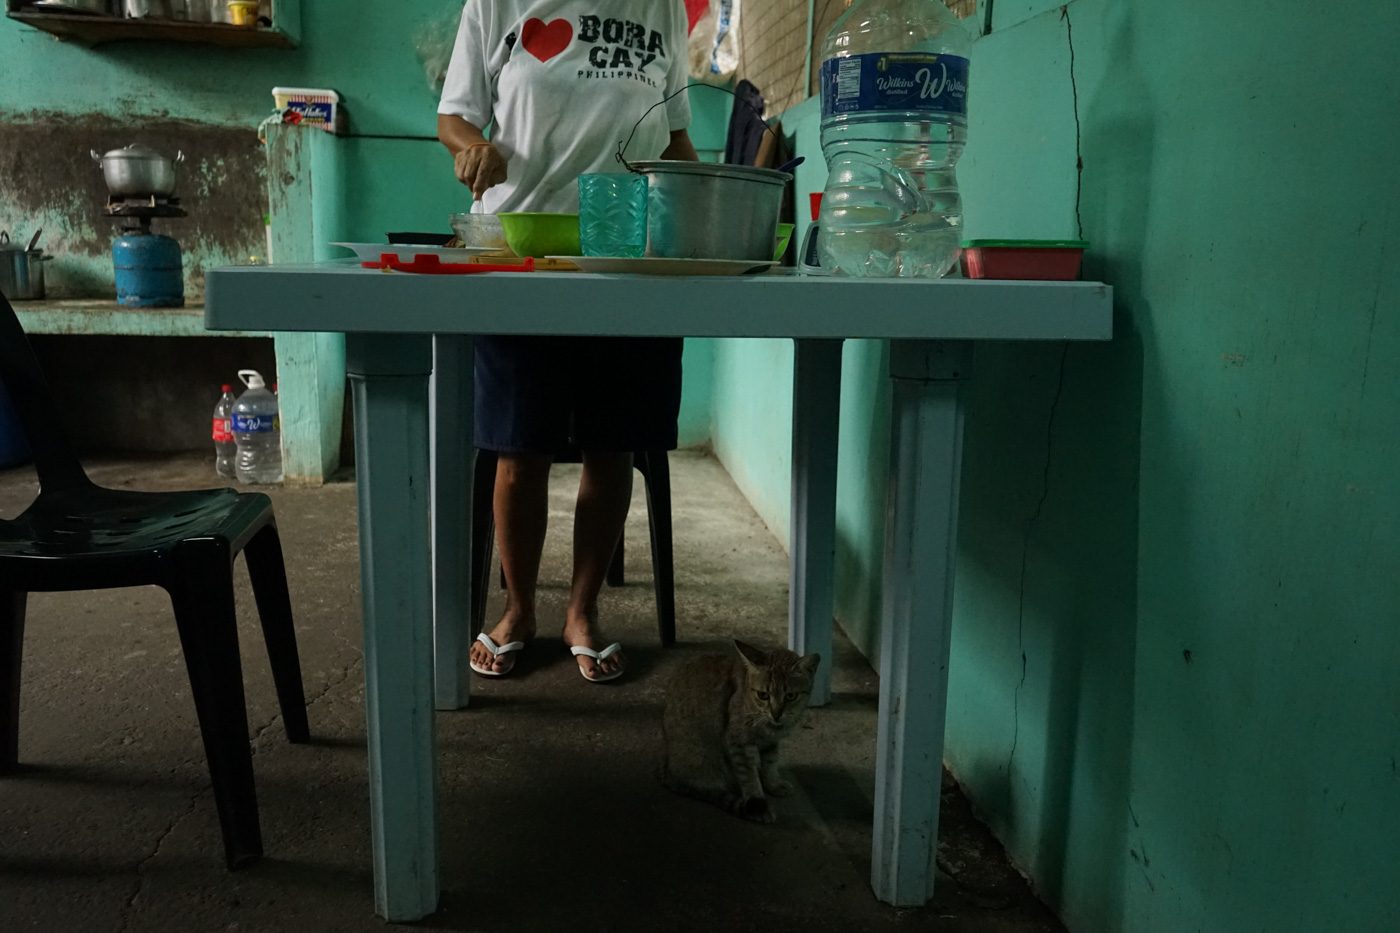  LUNCH TIME. A returnee prepares food for the other women while a stray cat that wandered into the facility sits under the kitchen table.